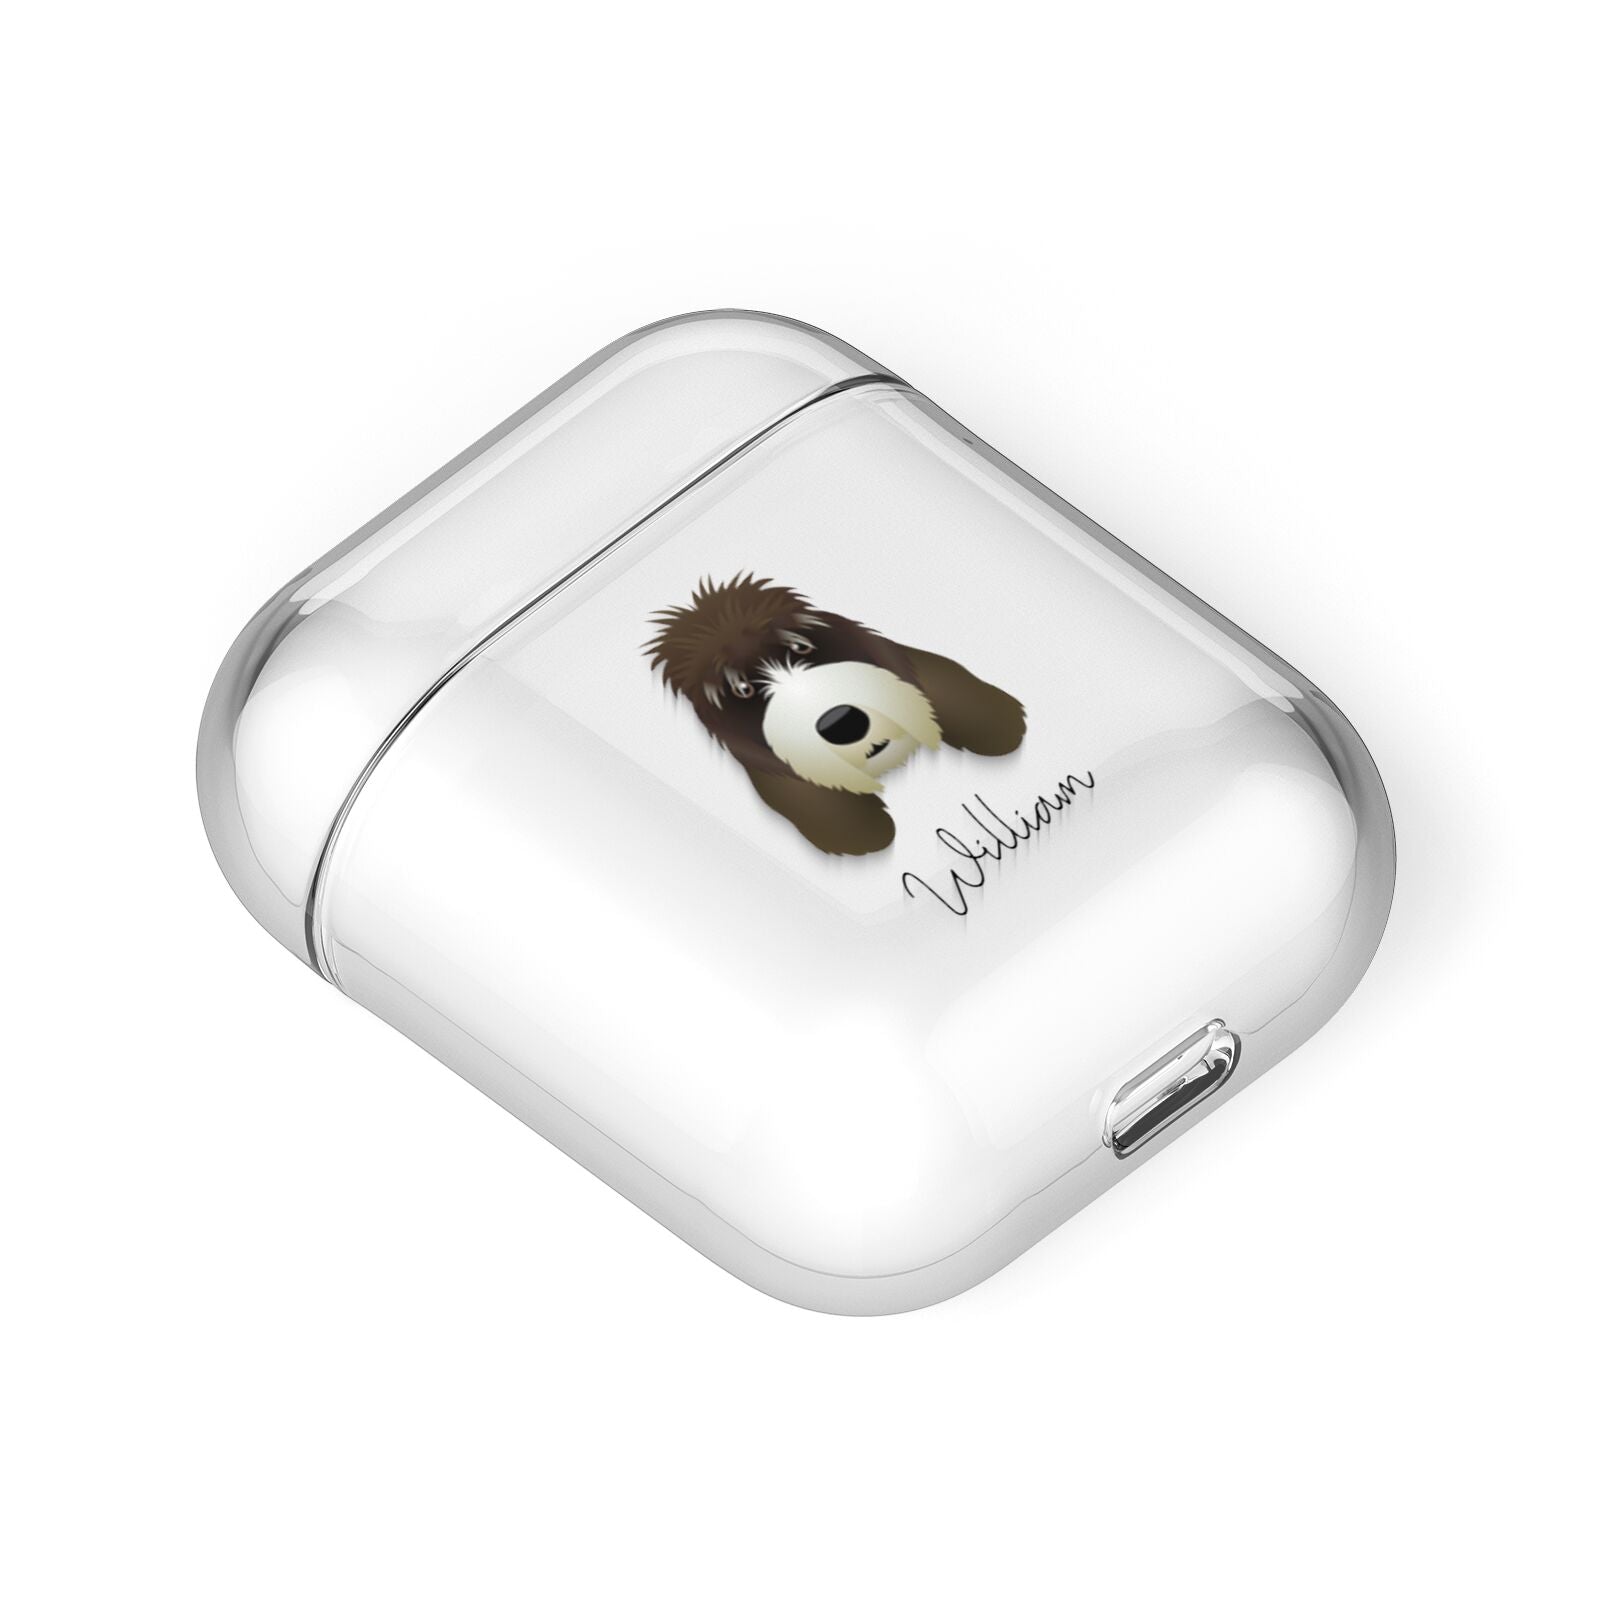 Grand Basset Griffon Vendeen Personalised AirPods Case Laid Flat